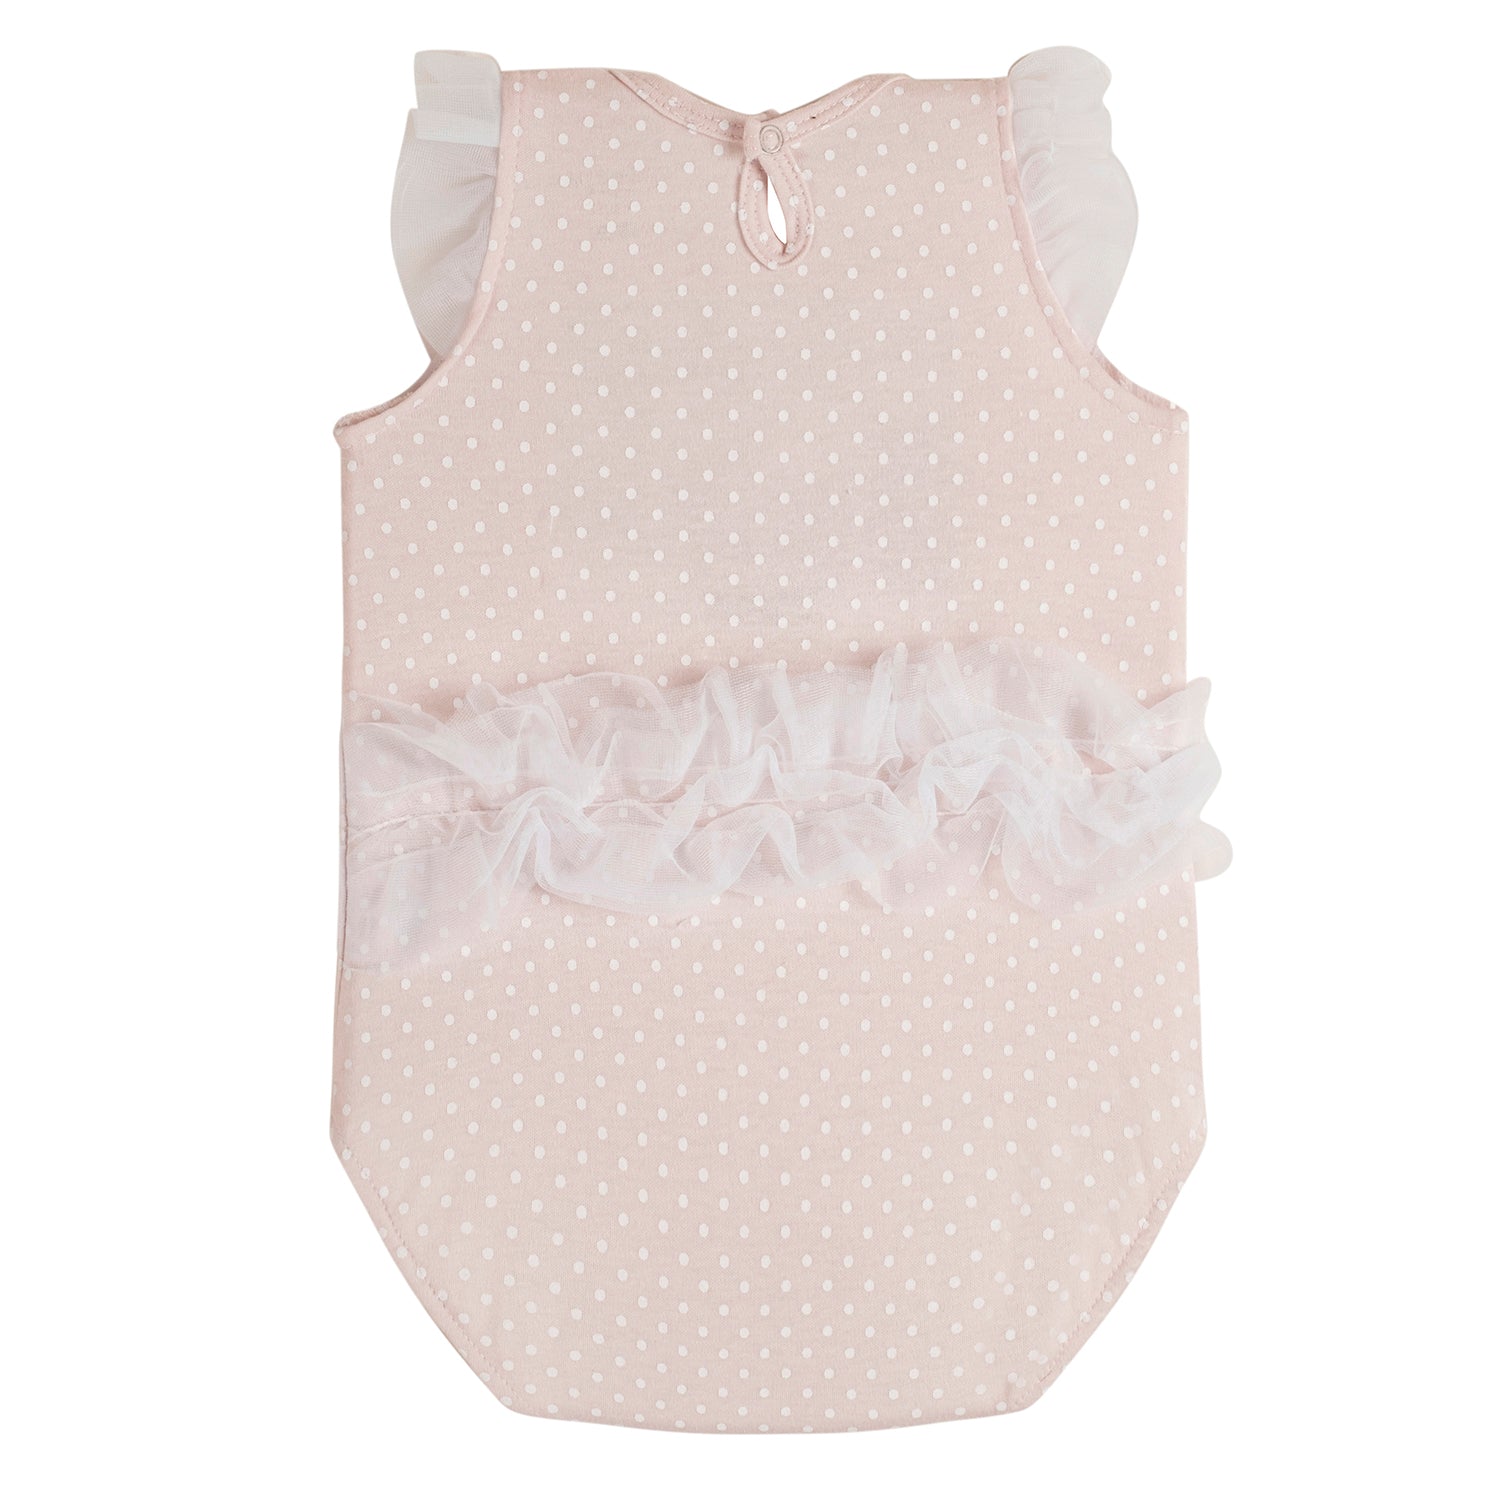 Baby Moo Polka Dotted Gift Set 3 Piece With Bodysuit, Socks And Headband - Peach